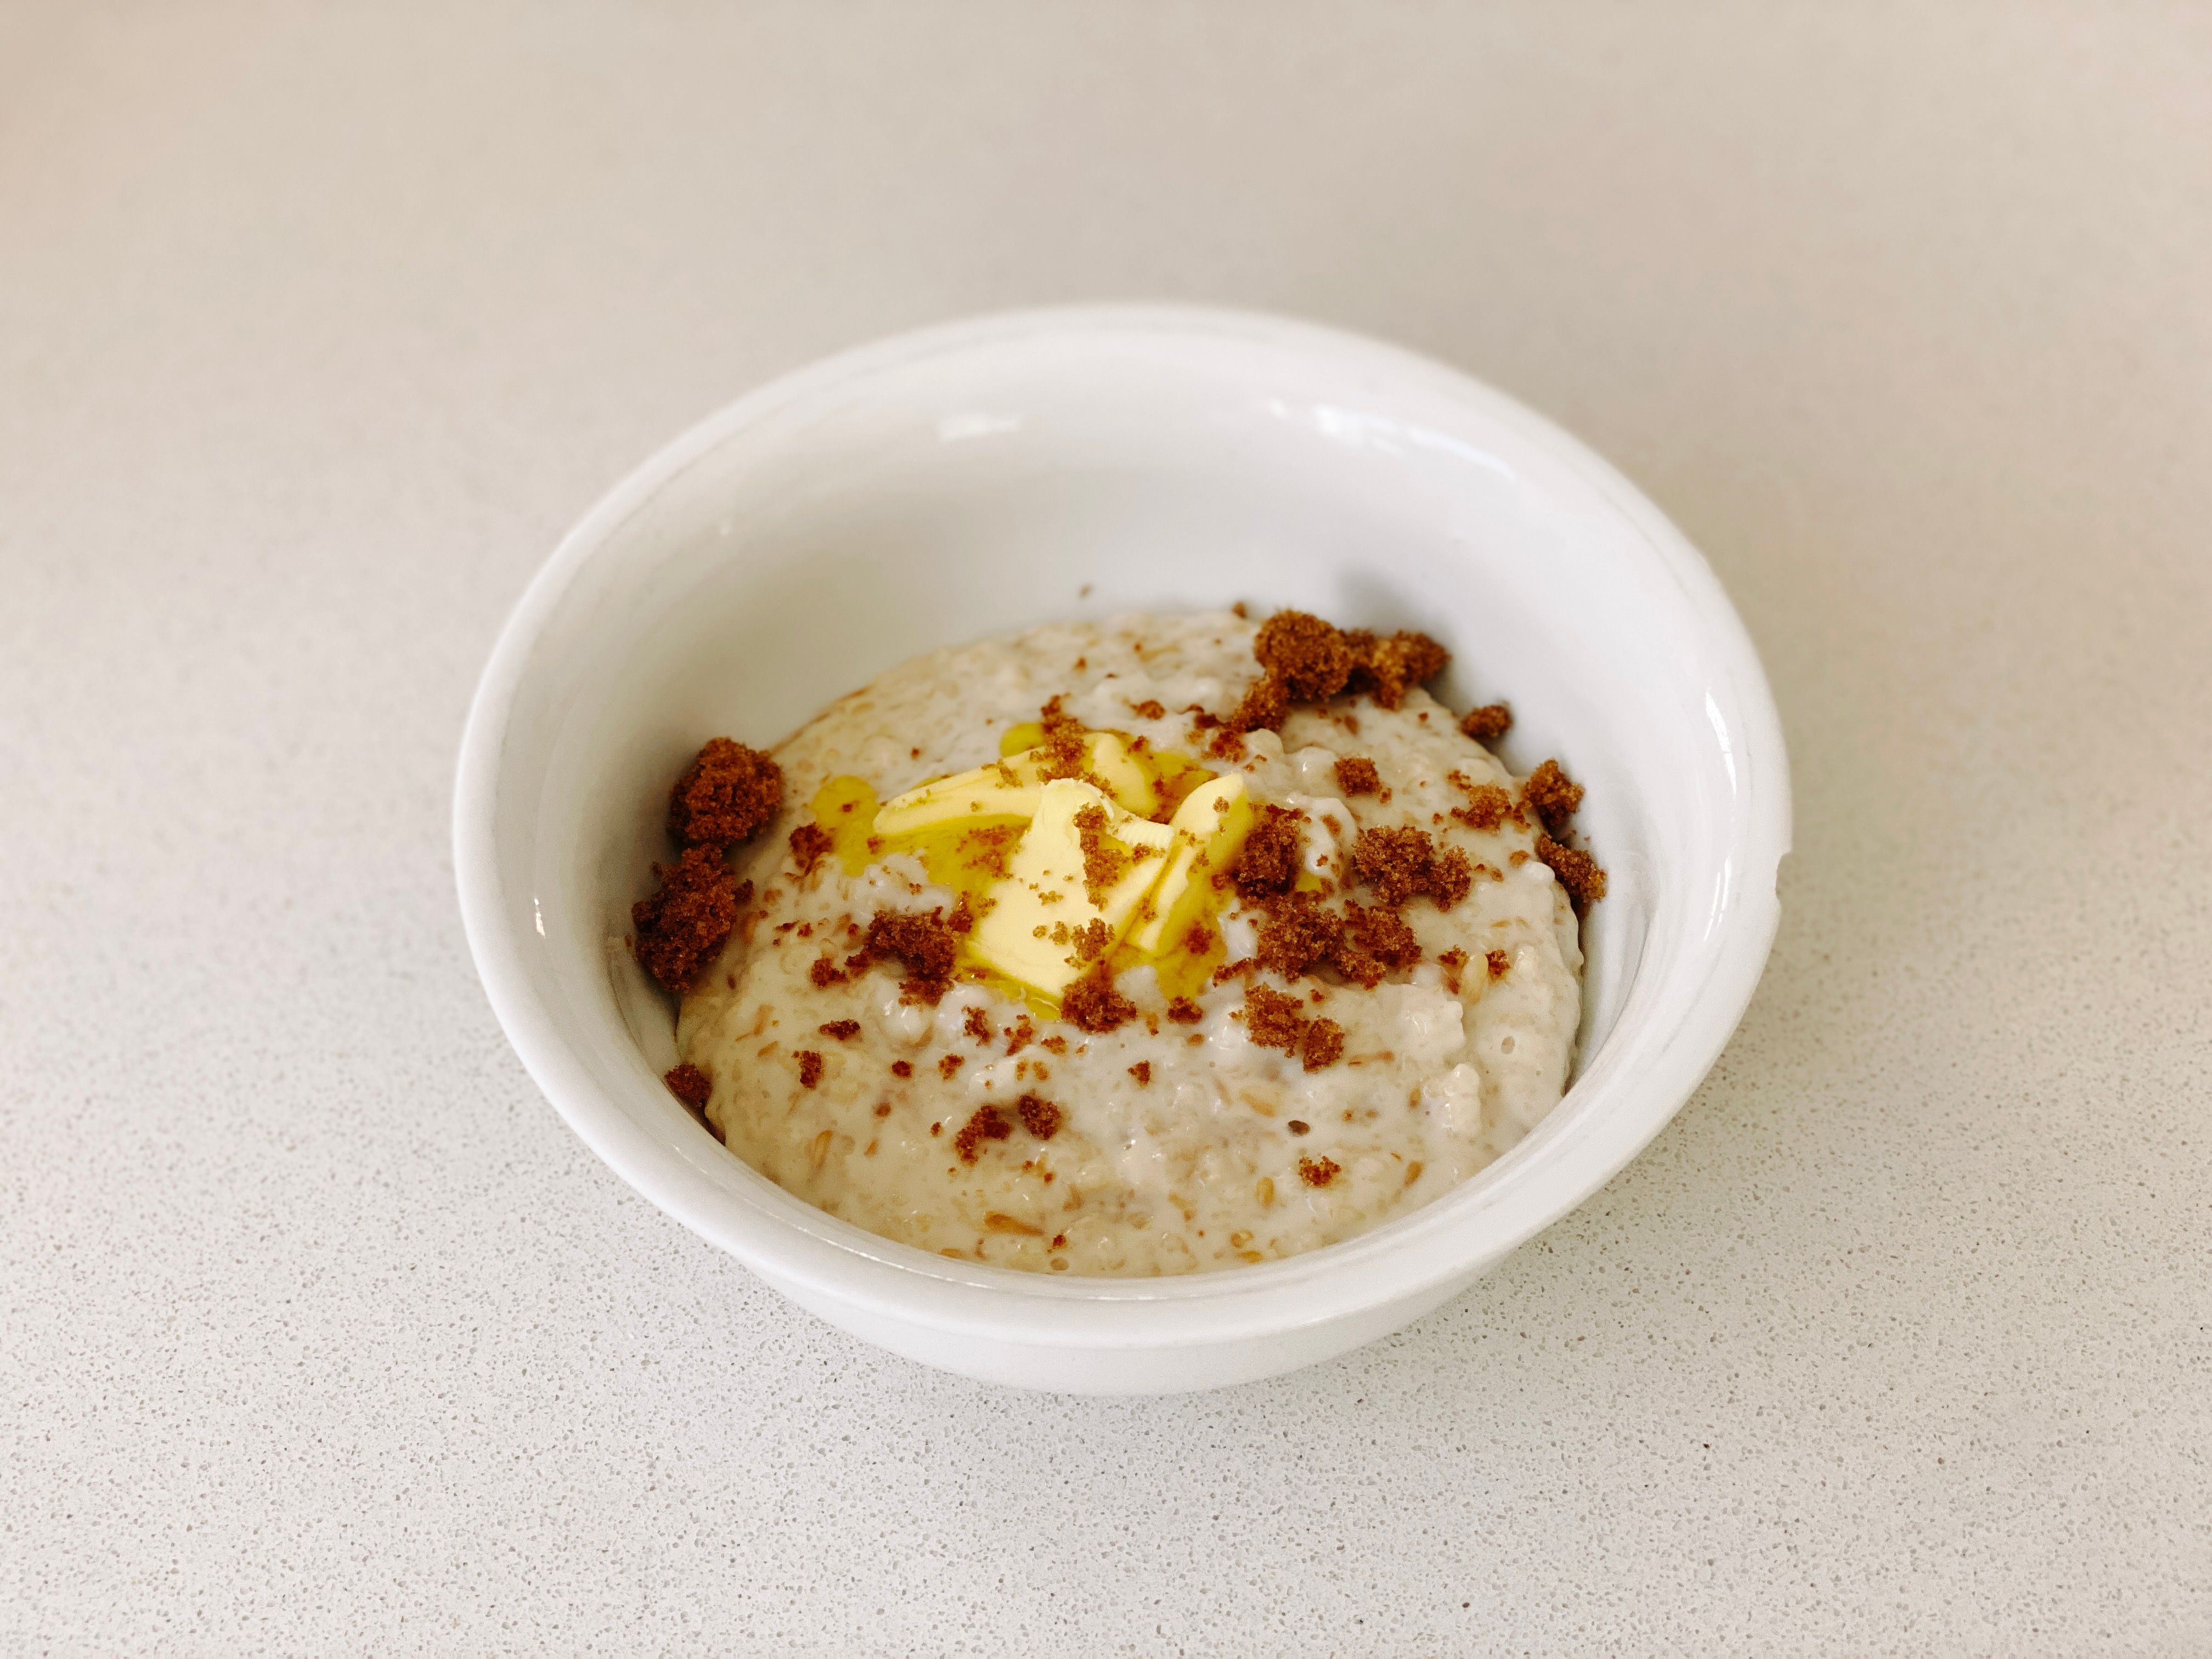 A photo of a bowl of porridge with butter and brown sugar on top.